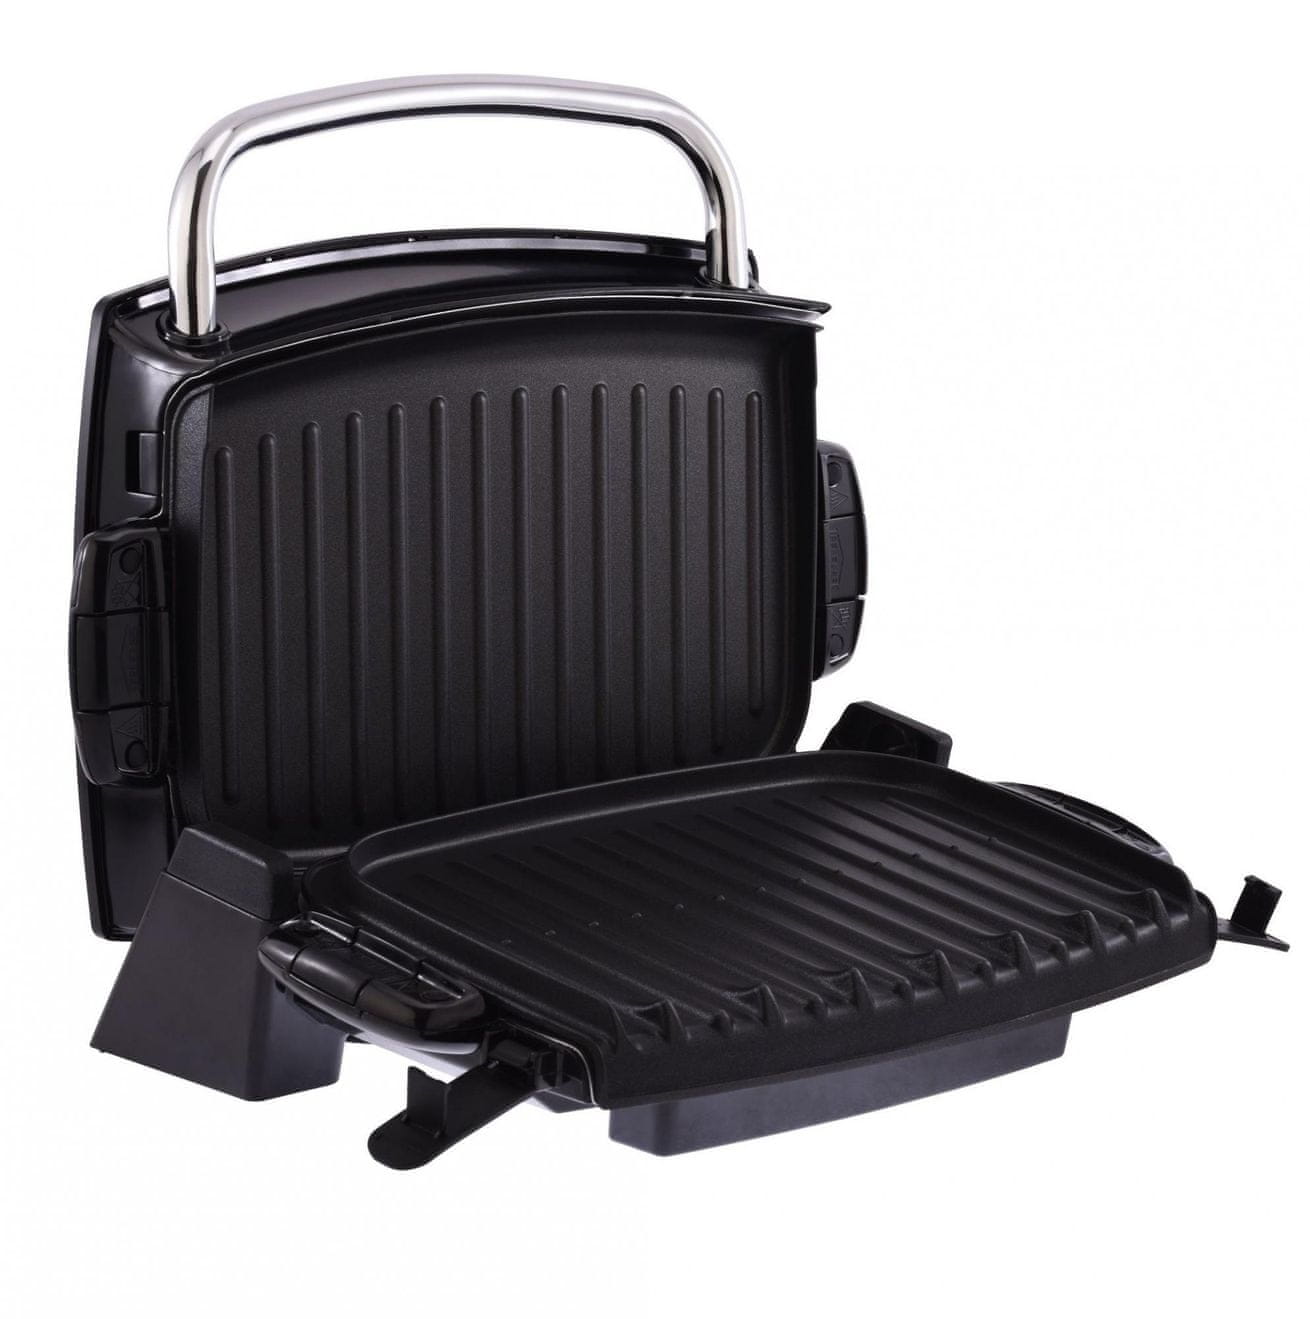 George Foreman 14525-56 Silver Grill & Melt Grill